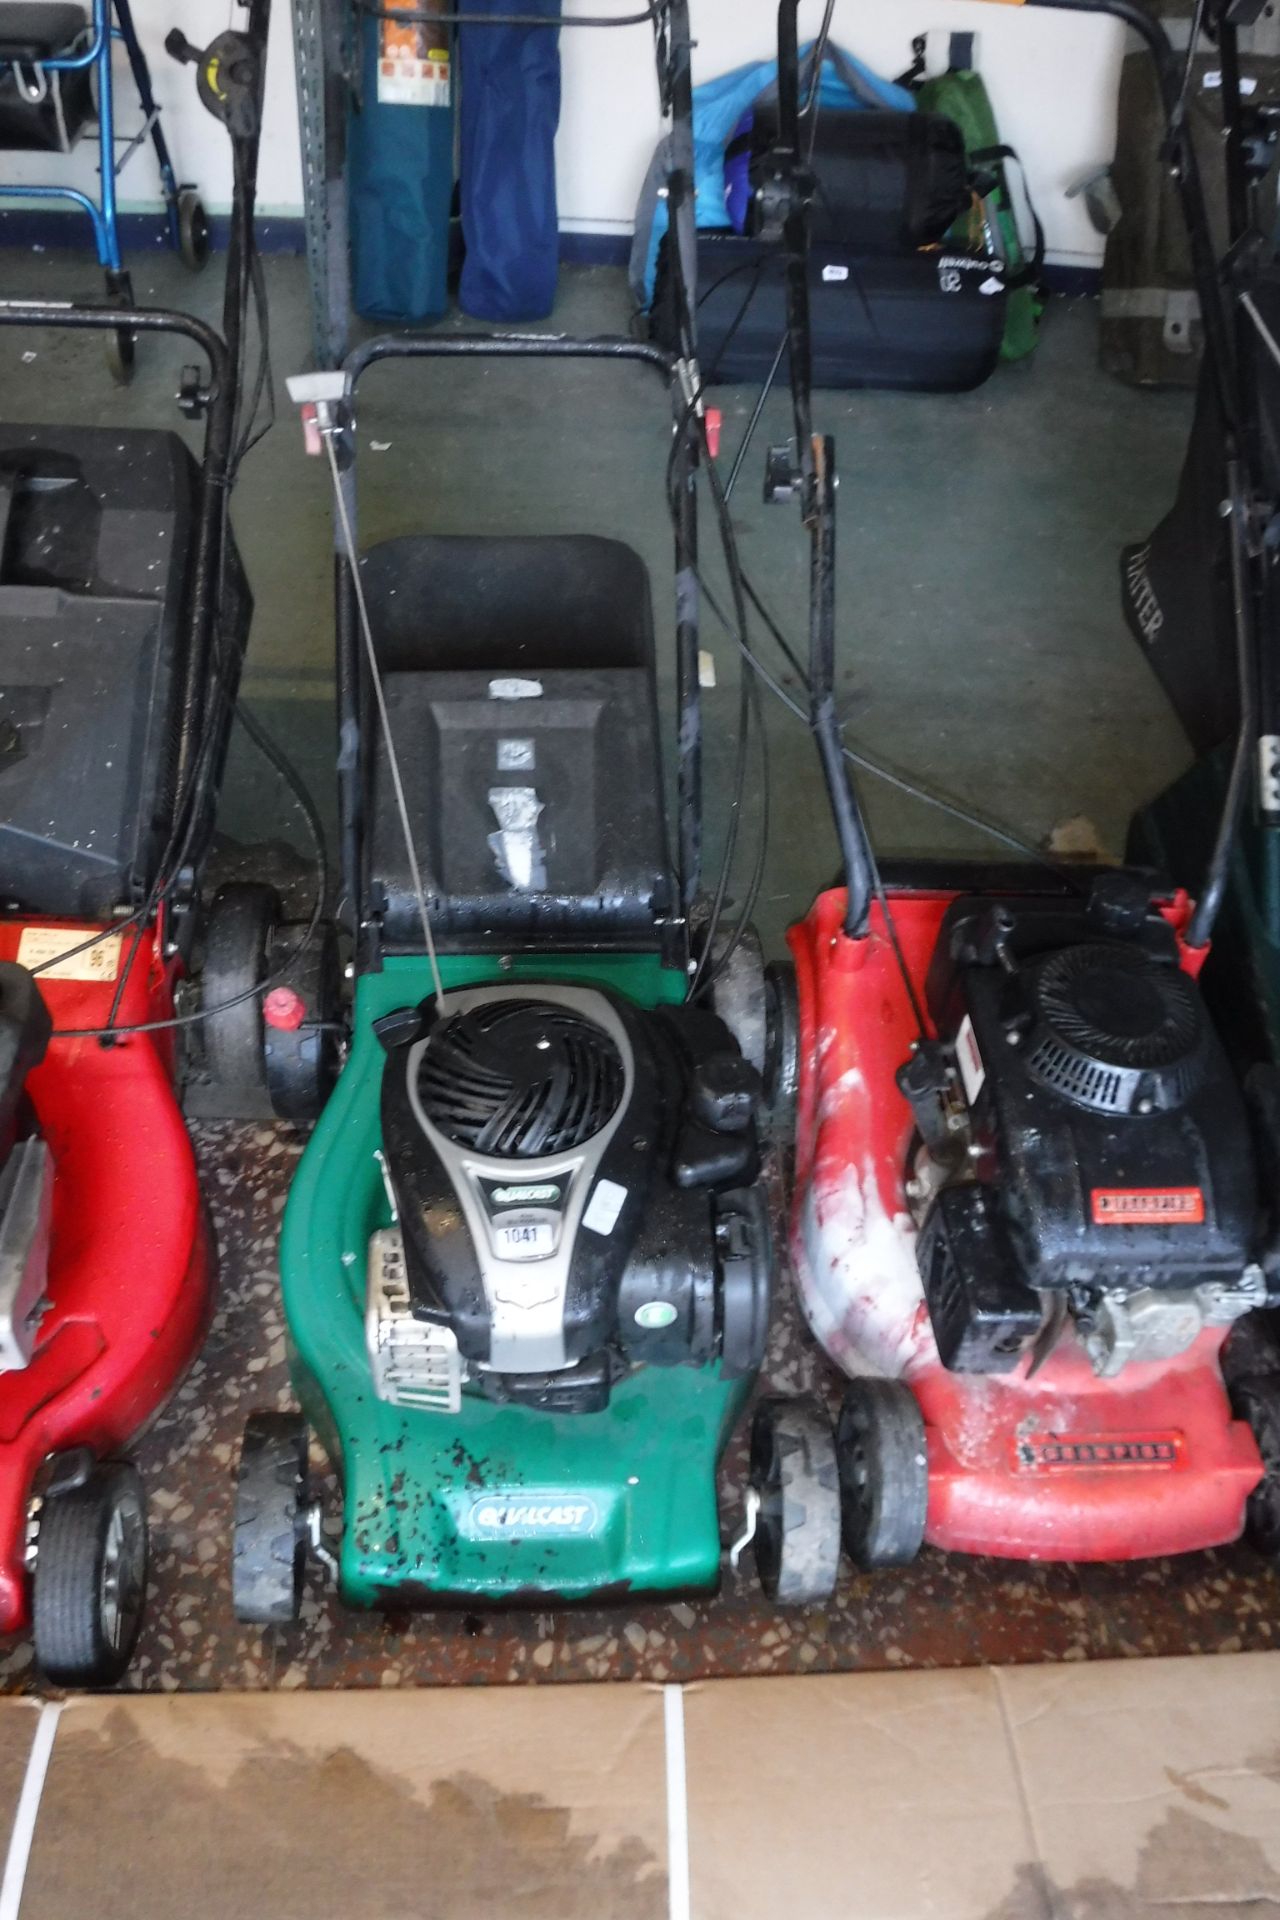 Qualcast self propelled petrol lawnmower with grass box